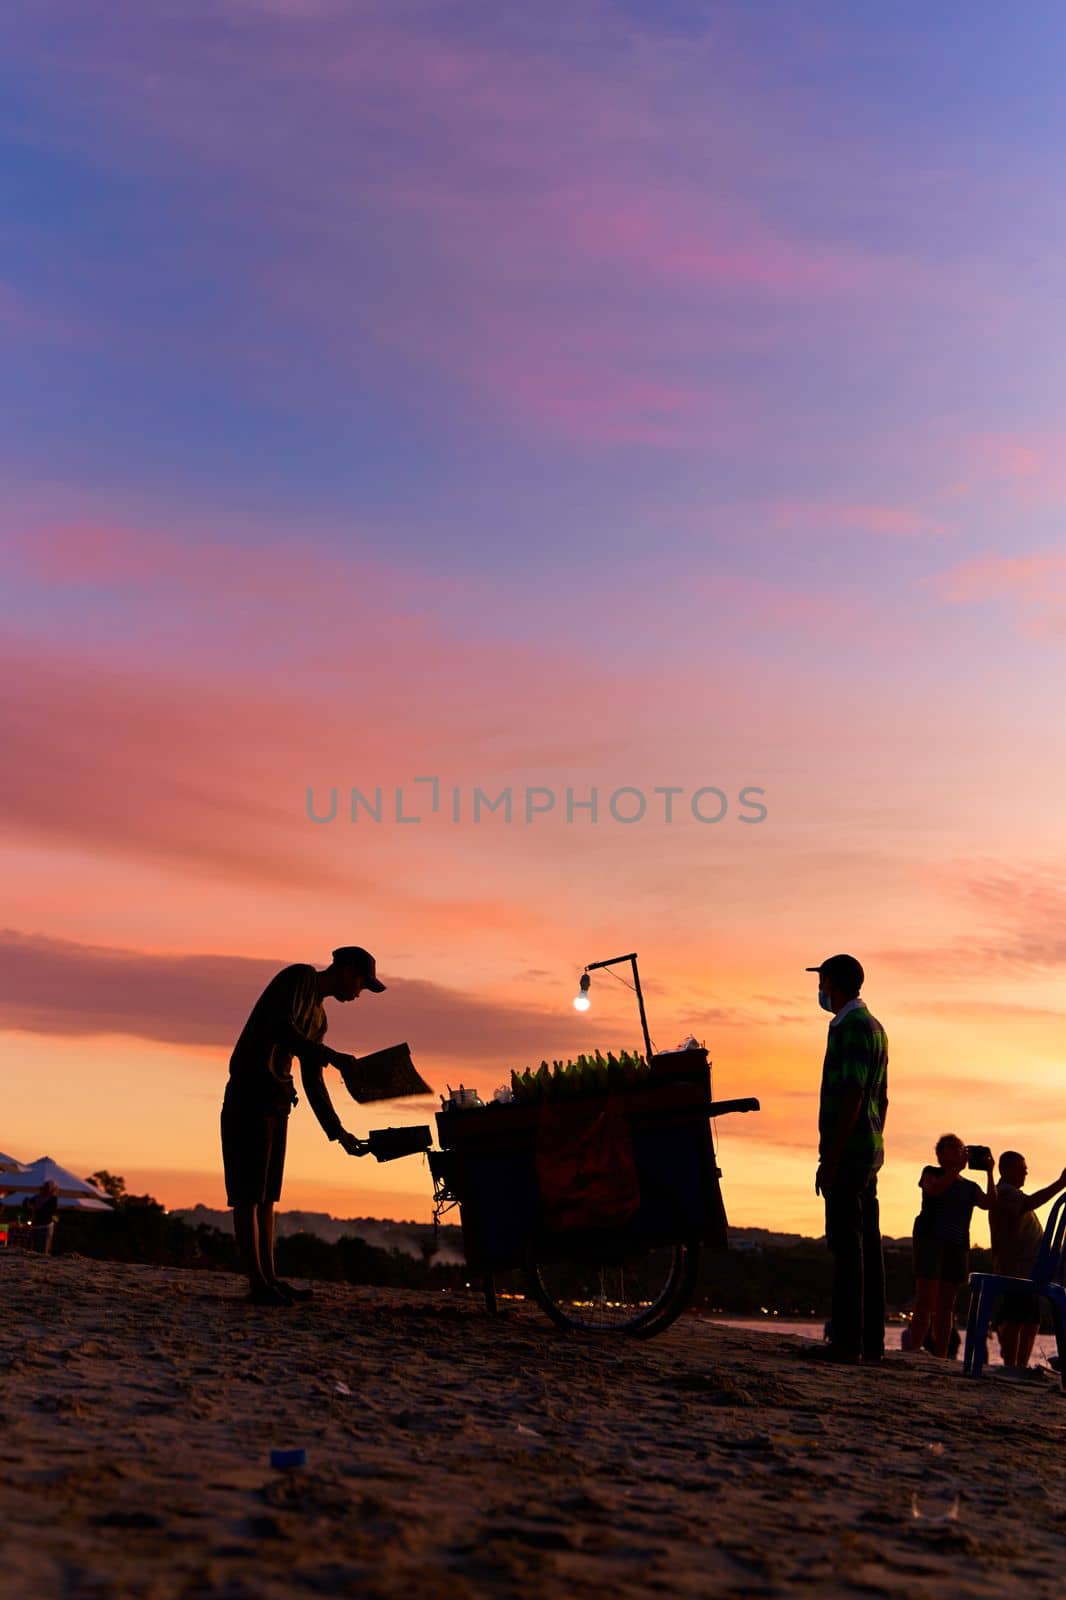 An evening silhouette of a vendor and his grill cart on the beach. Evening market on the beach. Bali, Indonesia - 11.29.2022